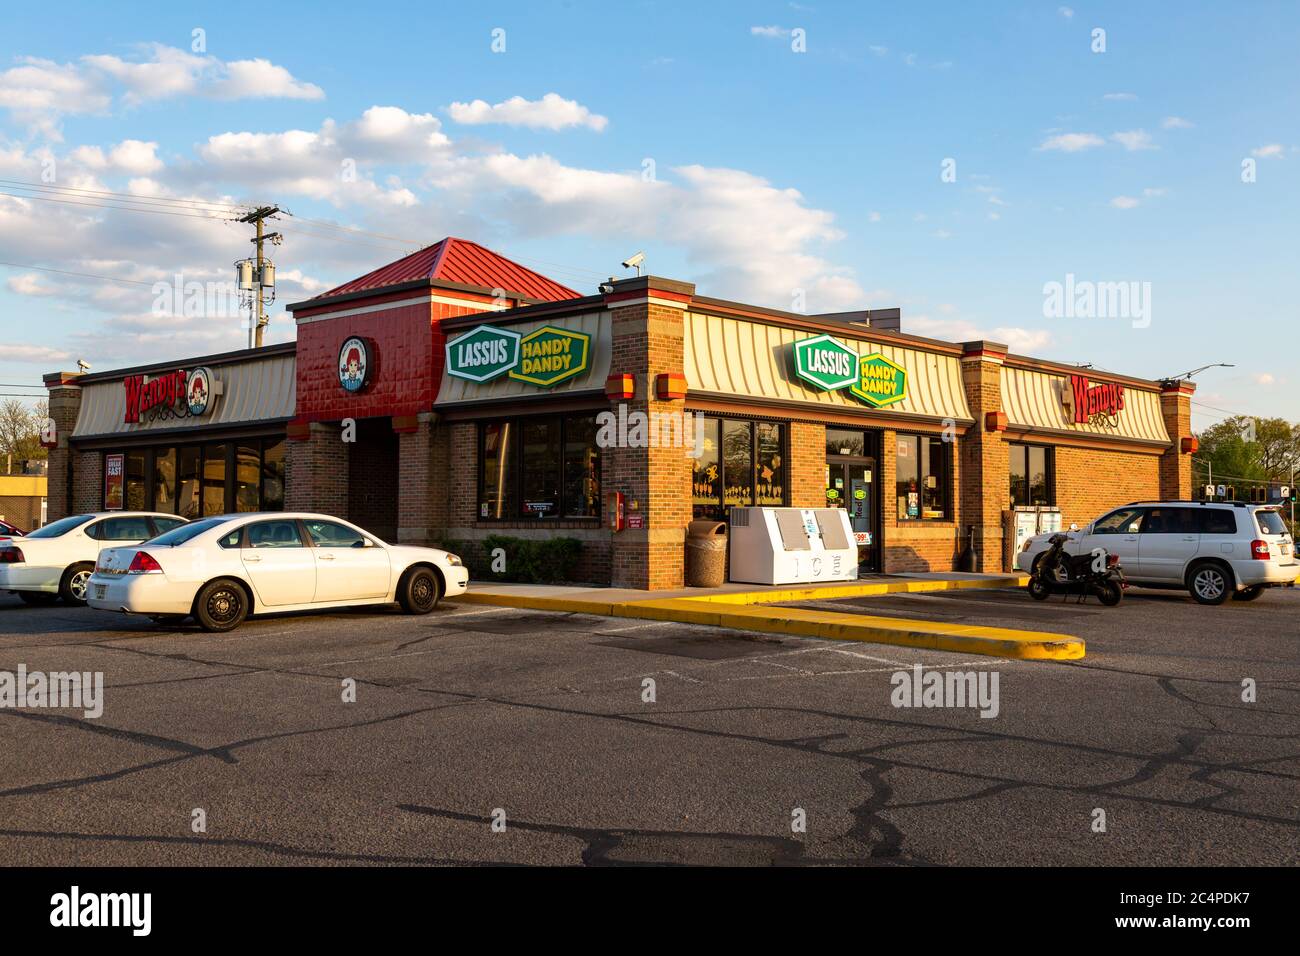 A combination Wendy's restaurant / Lassus Handy Dandy convenience store in Fort Wayne, Indiana, USA. Stock Photo